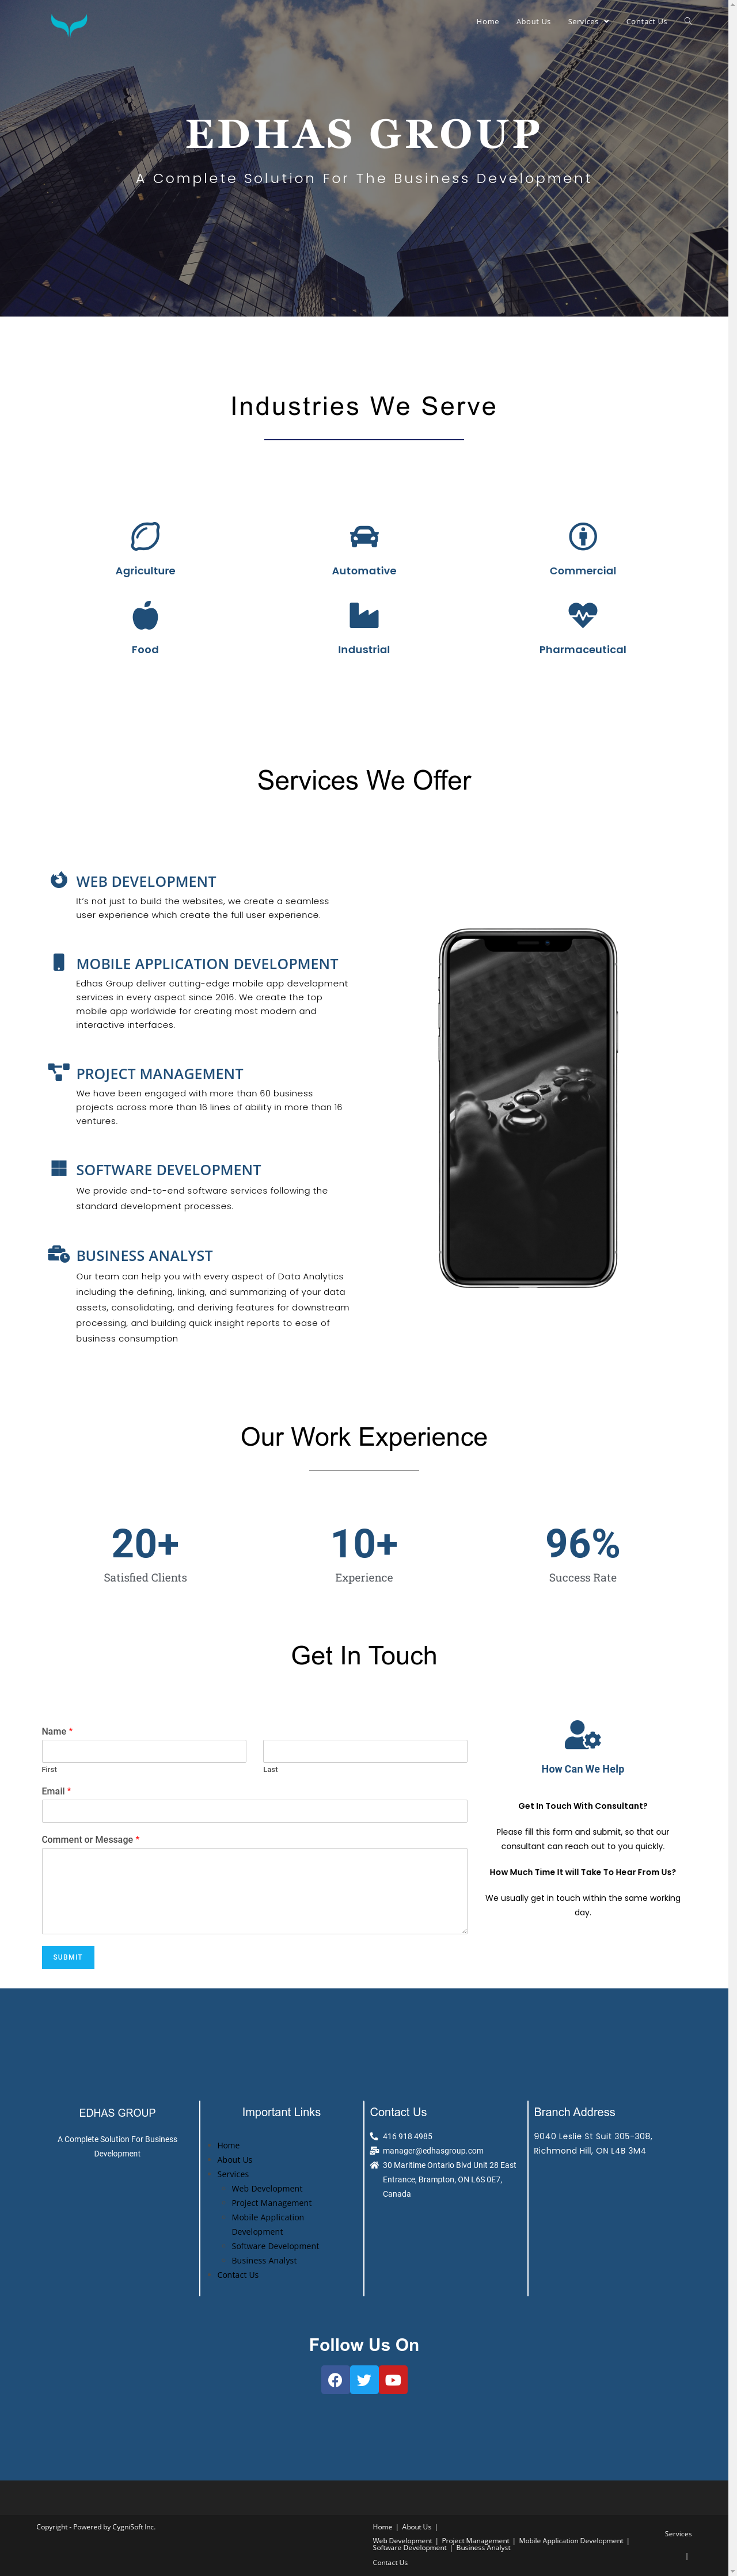 edhasgroup – A complete business solution.png